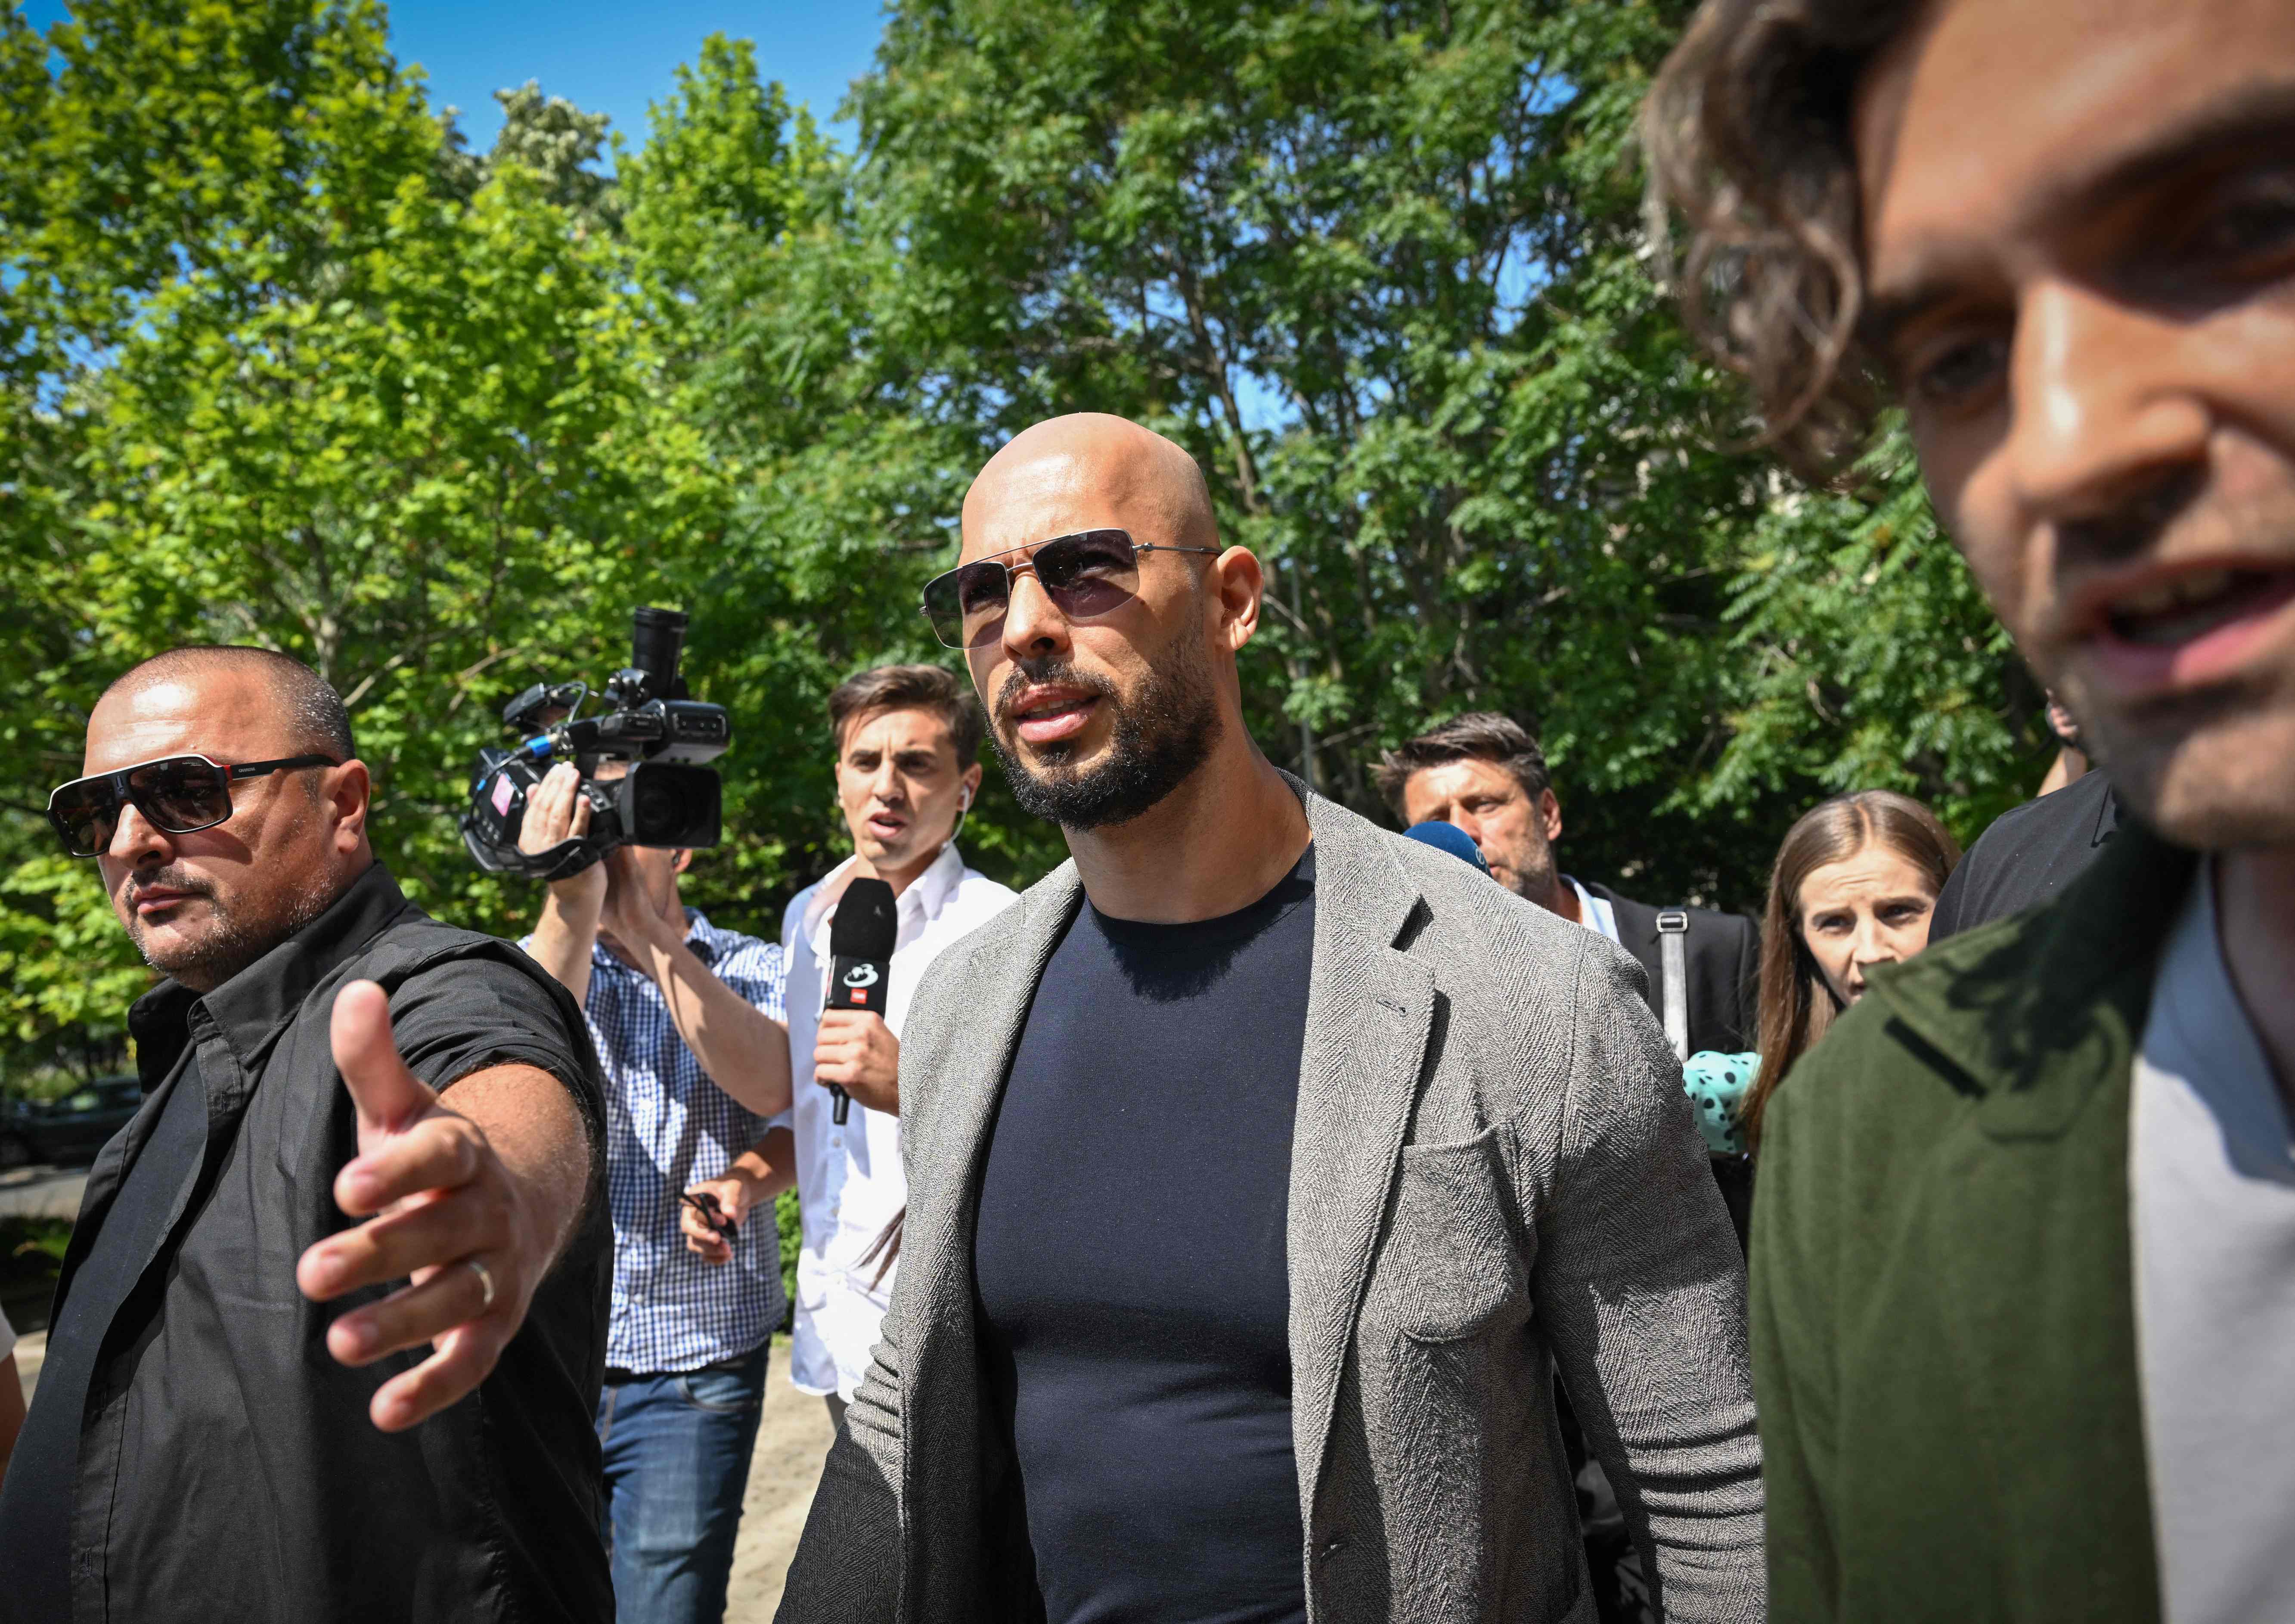 Controversial influencer Andrew Tate arrives at the Municipal Court of Bucharest, Romania